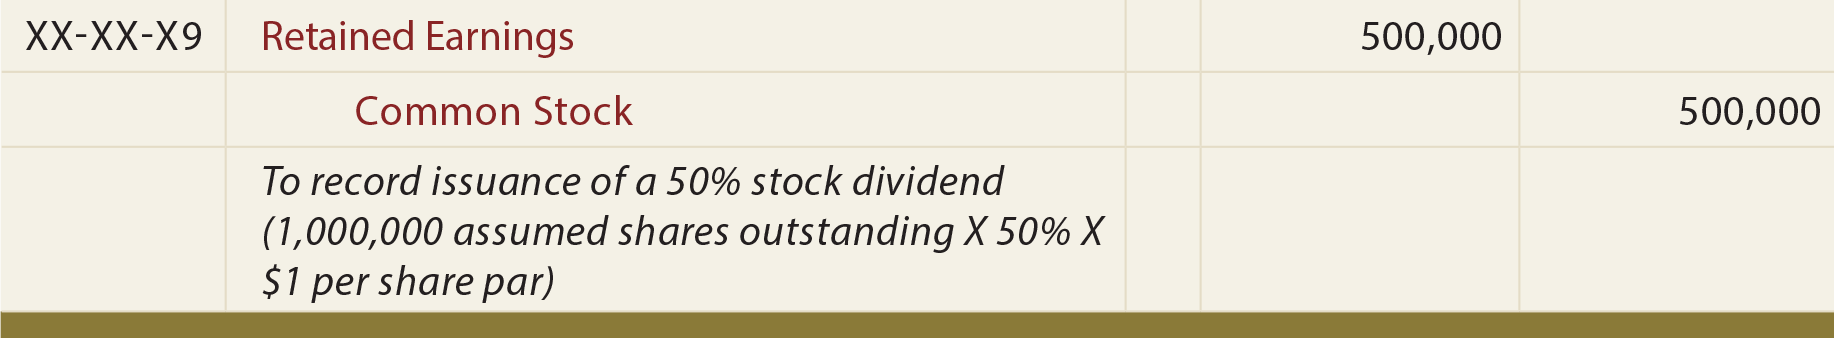 Large Stock Dividend General Journal Entry  - To record issuance of large stock dividend